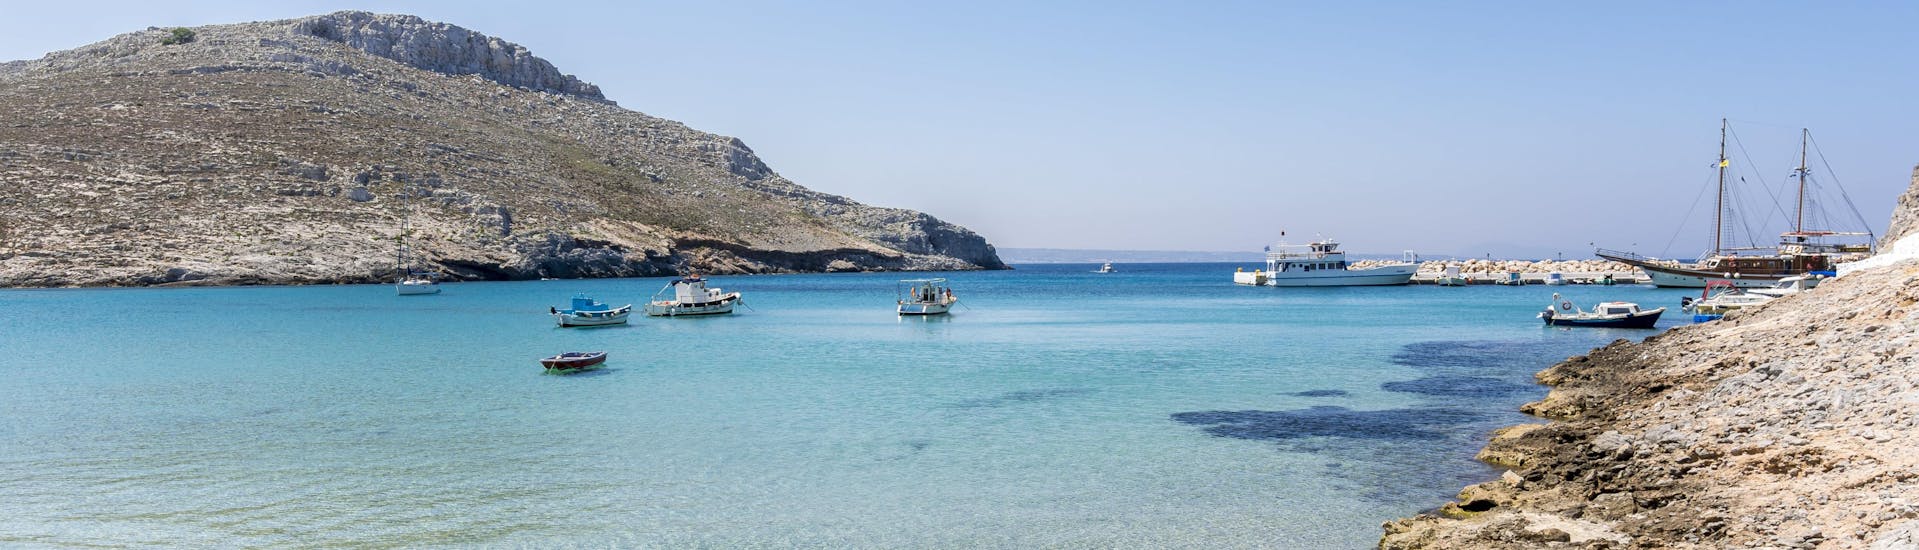 View over a bay on the Island of Pserimos, reachable via a boat trip in the Dodecanese.